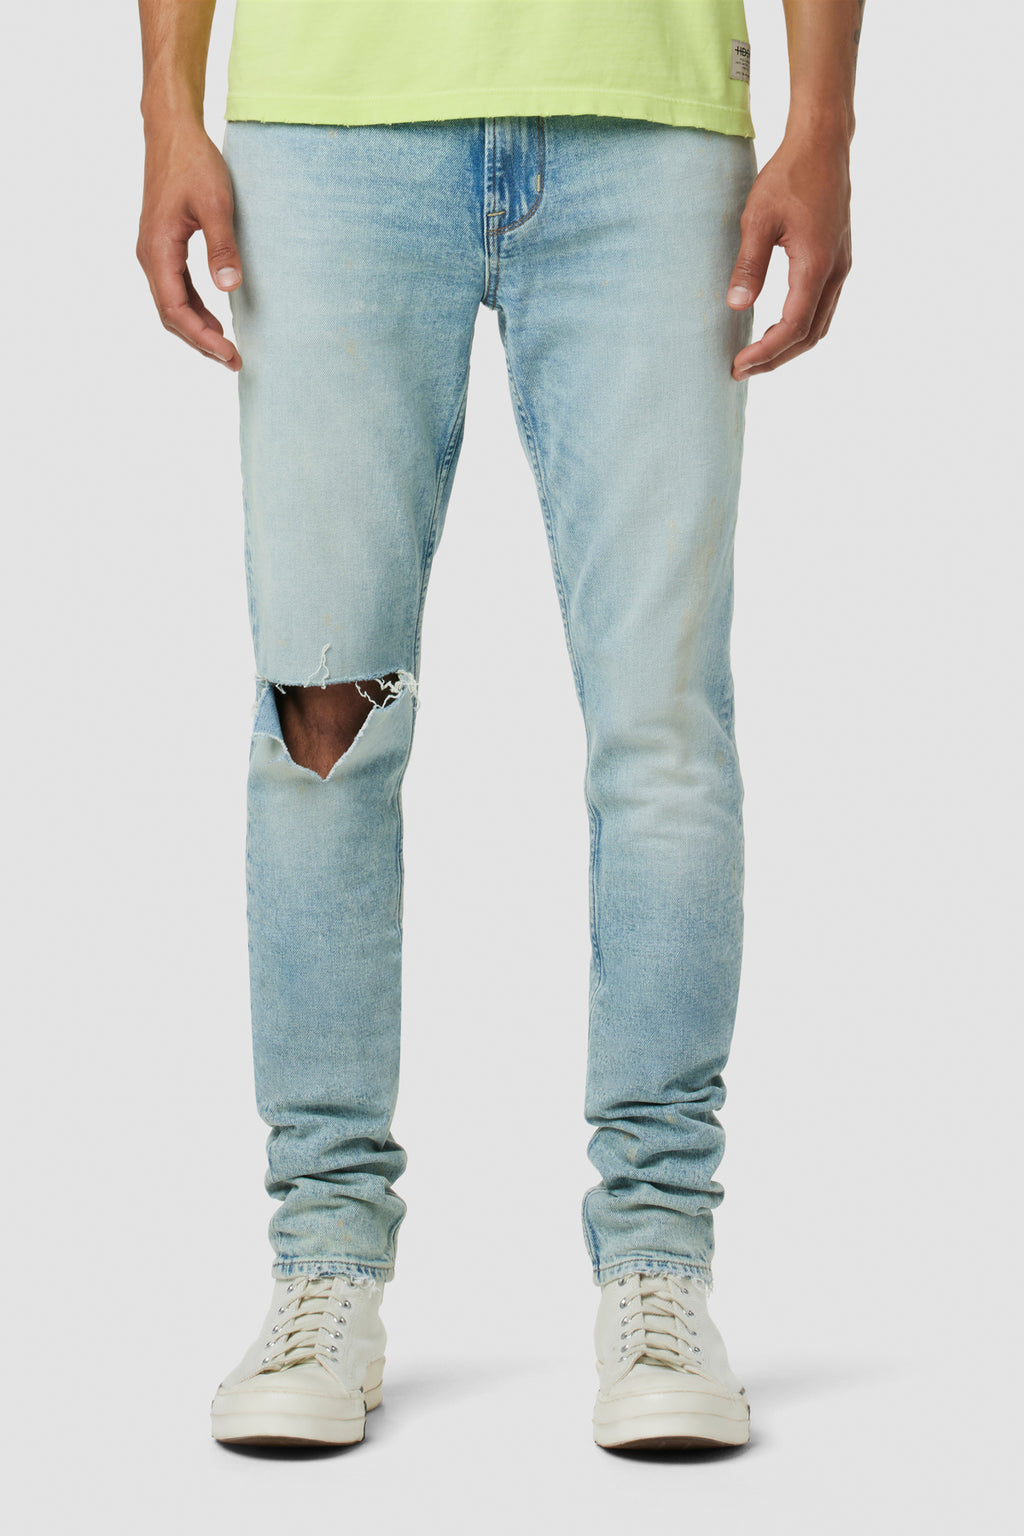 Buy Painted Jeans Men Online In India - Etsy India